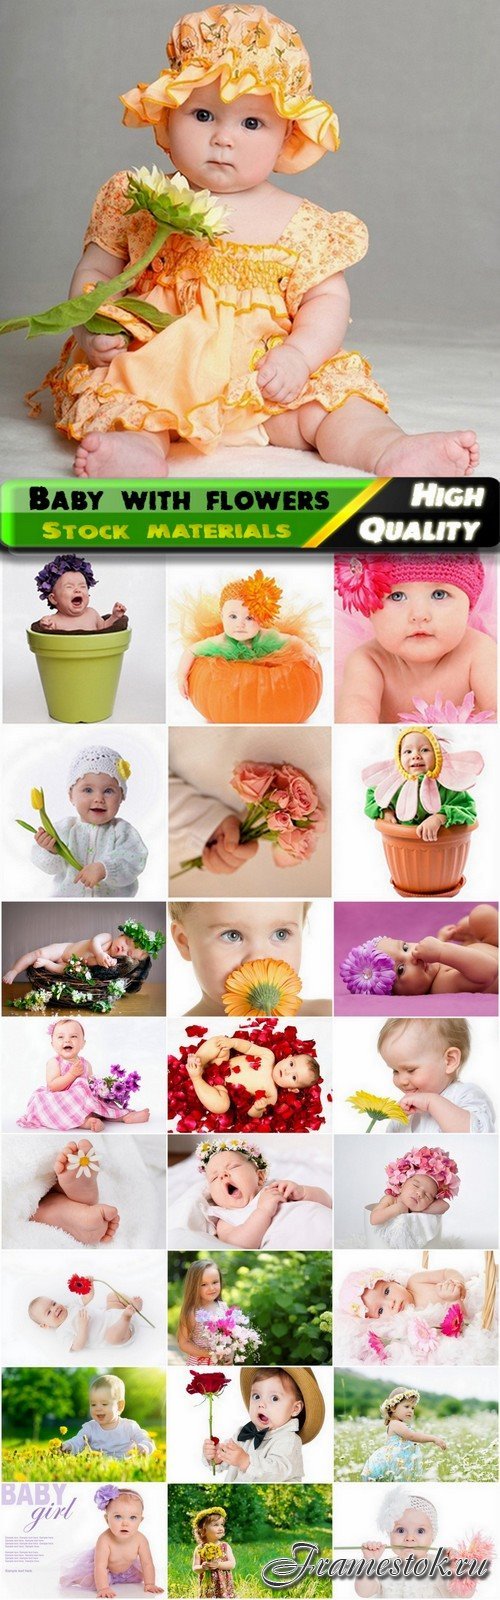 Cute little baby with flowers - 25 HQ Jpg